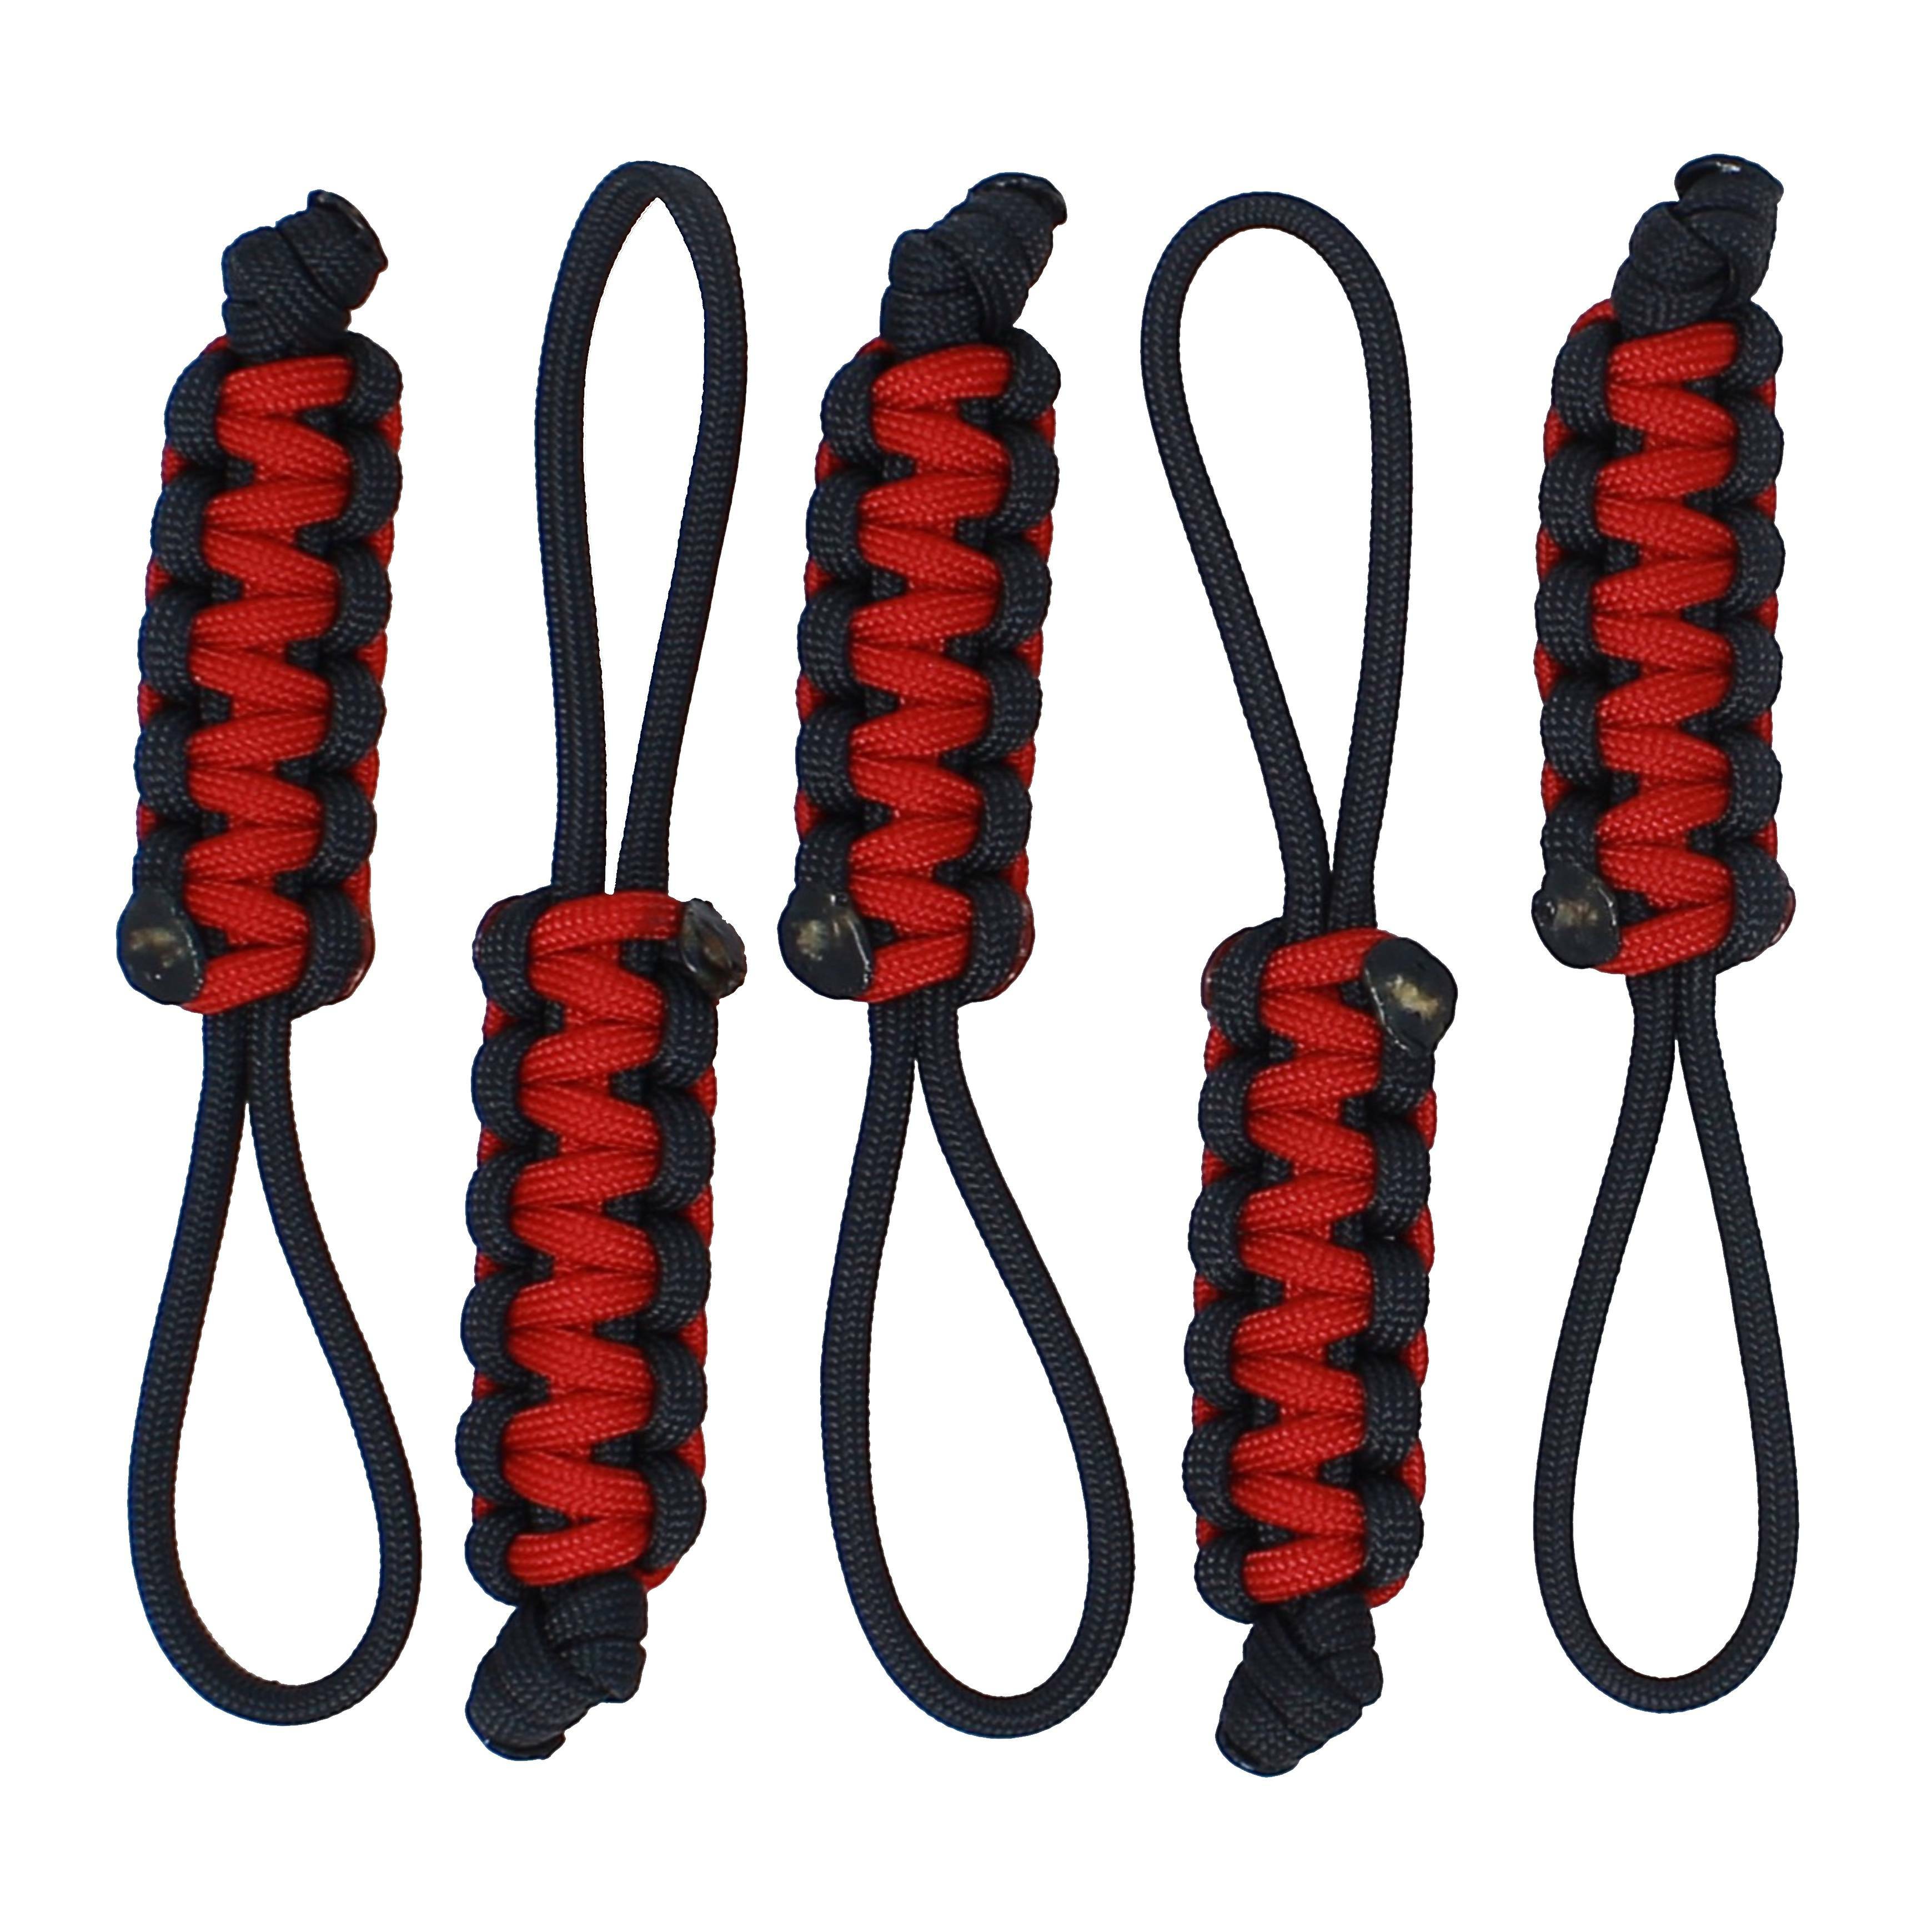 RedVex Paracord Heavy Duty Zipper Pulls - (Qty-3) Choose Your Size and Color